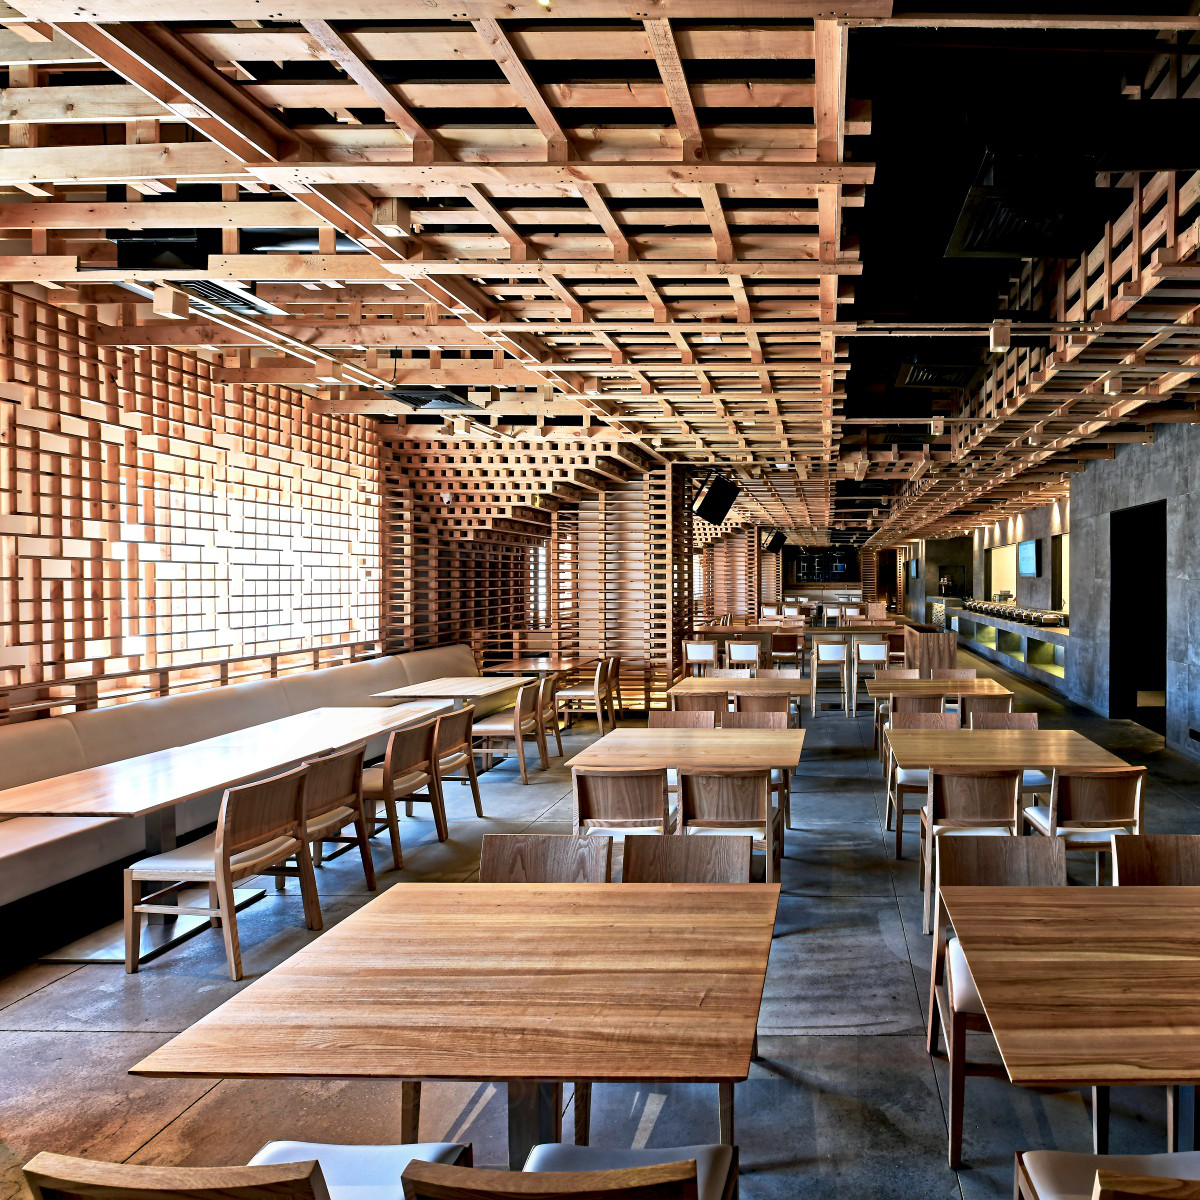 The Pallet Restaurant and Micro Brewery by Ketan Jawdekar